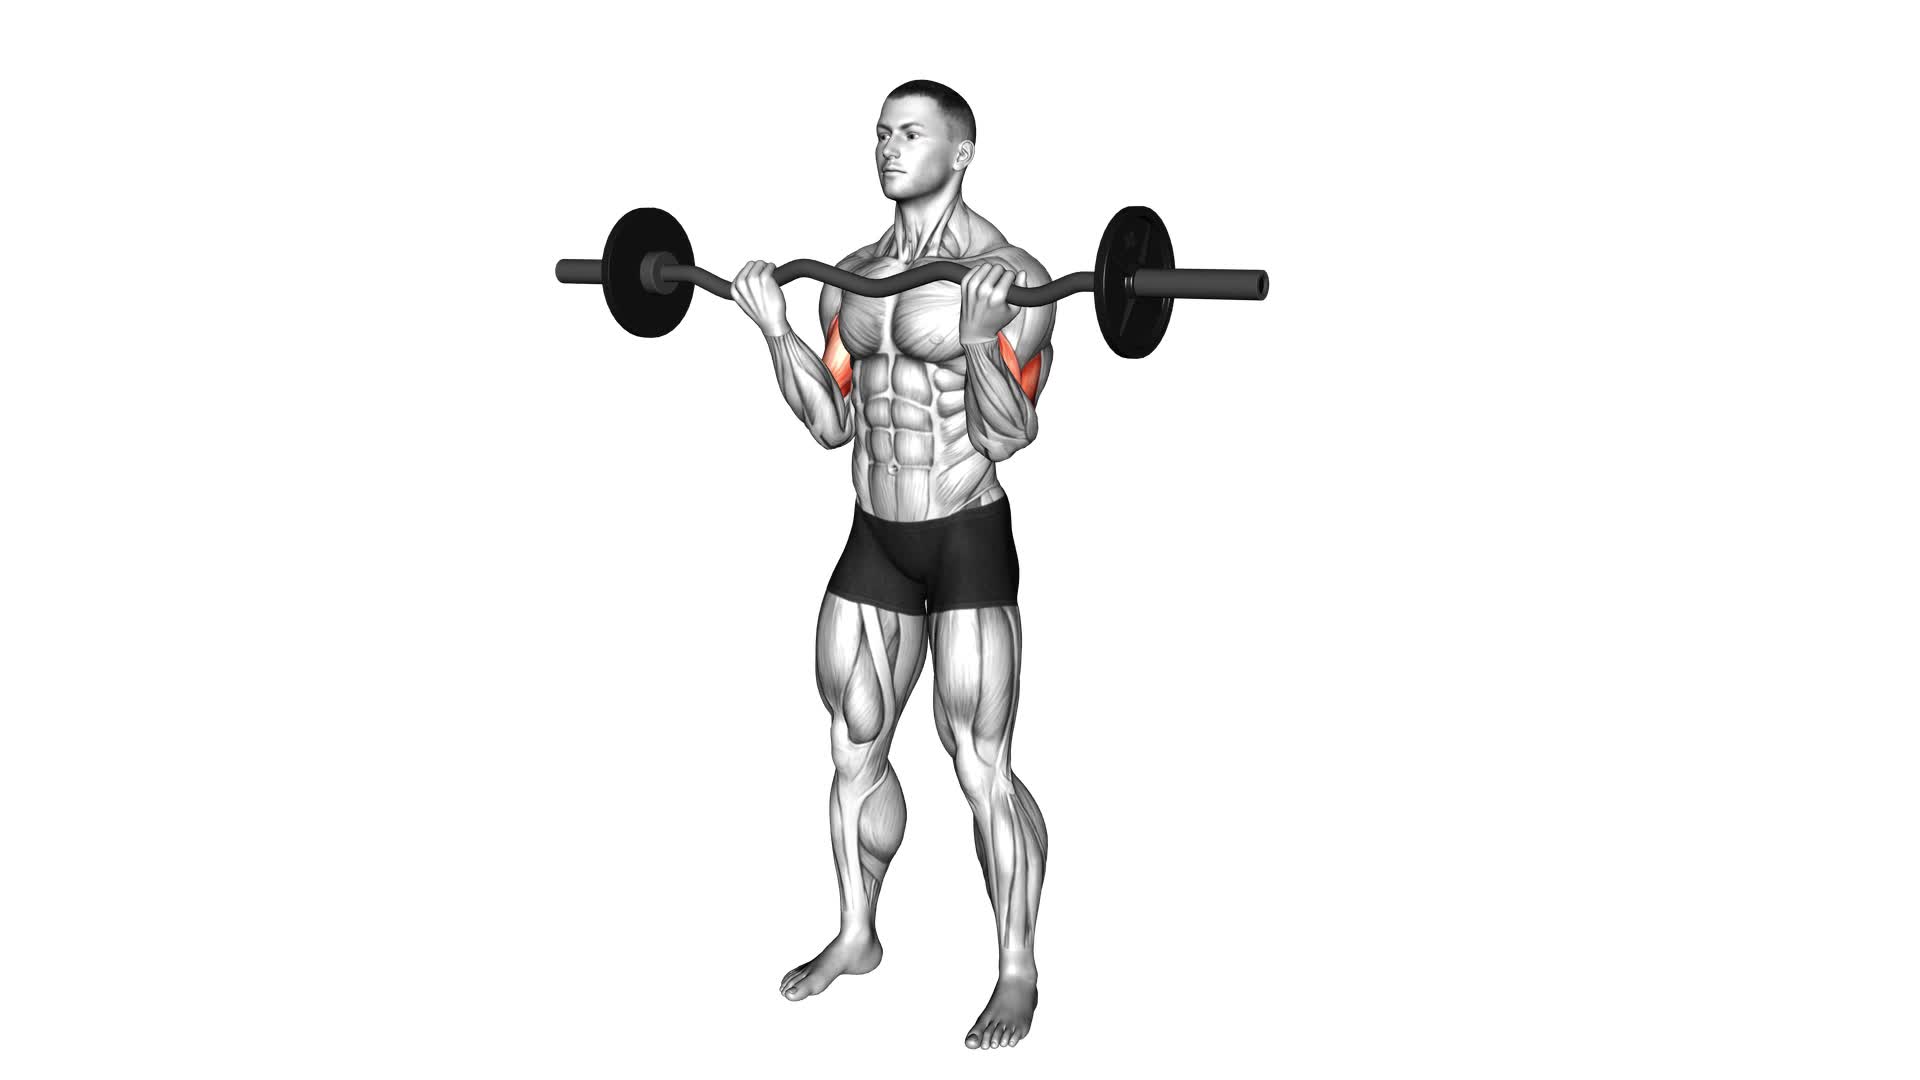 EZ Barbell Curl - Video Exercise Guide & Tips